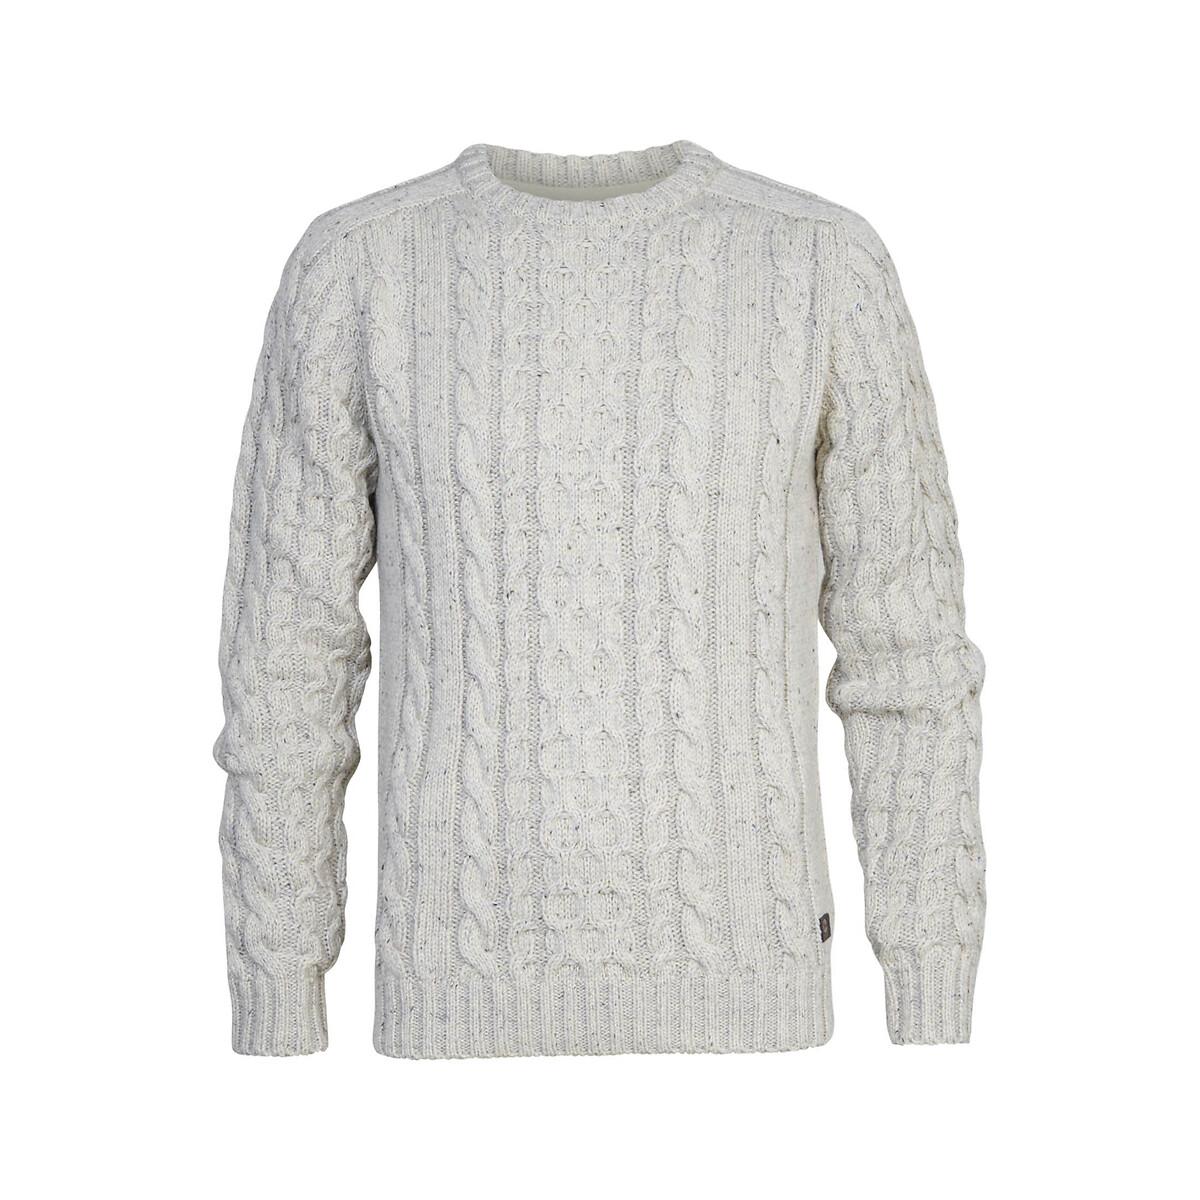 Cotton Mix Jumper in Cable Knit with Crew Neck